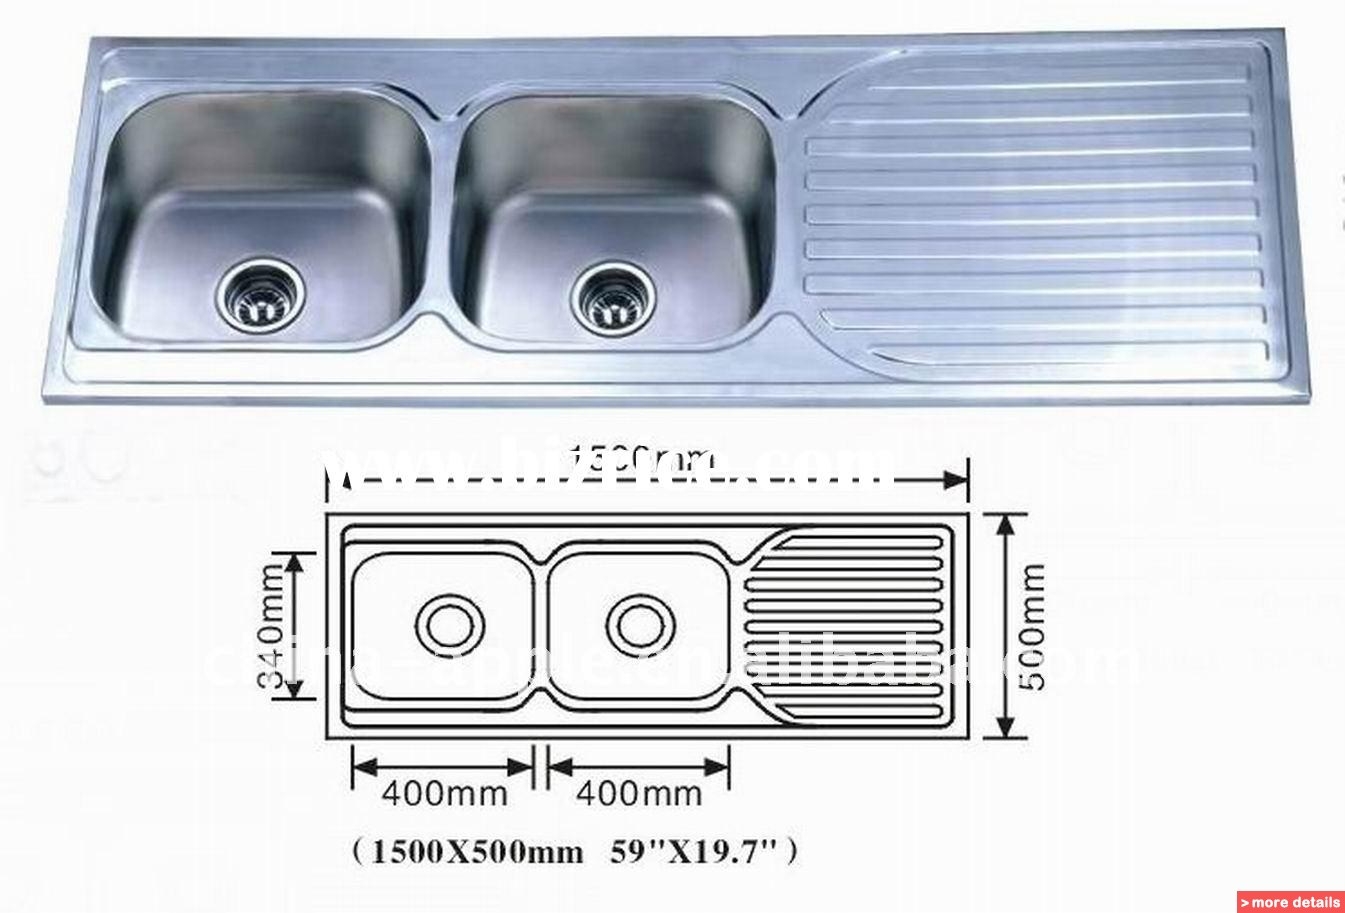 double kitchen sink dimensions